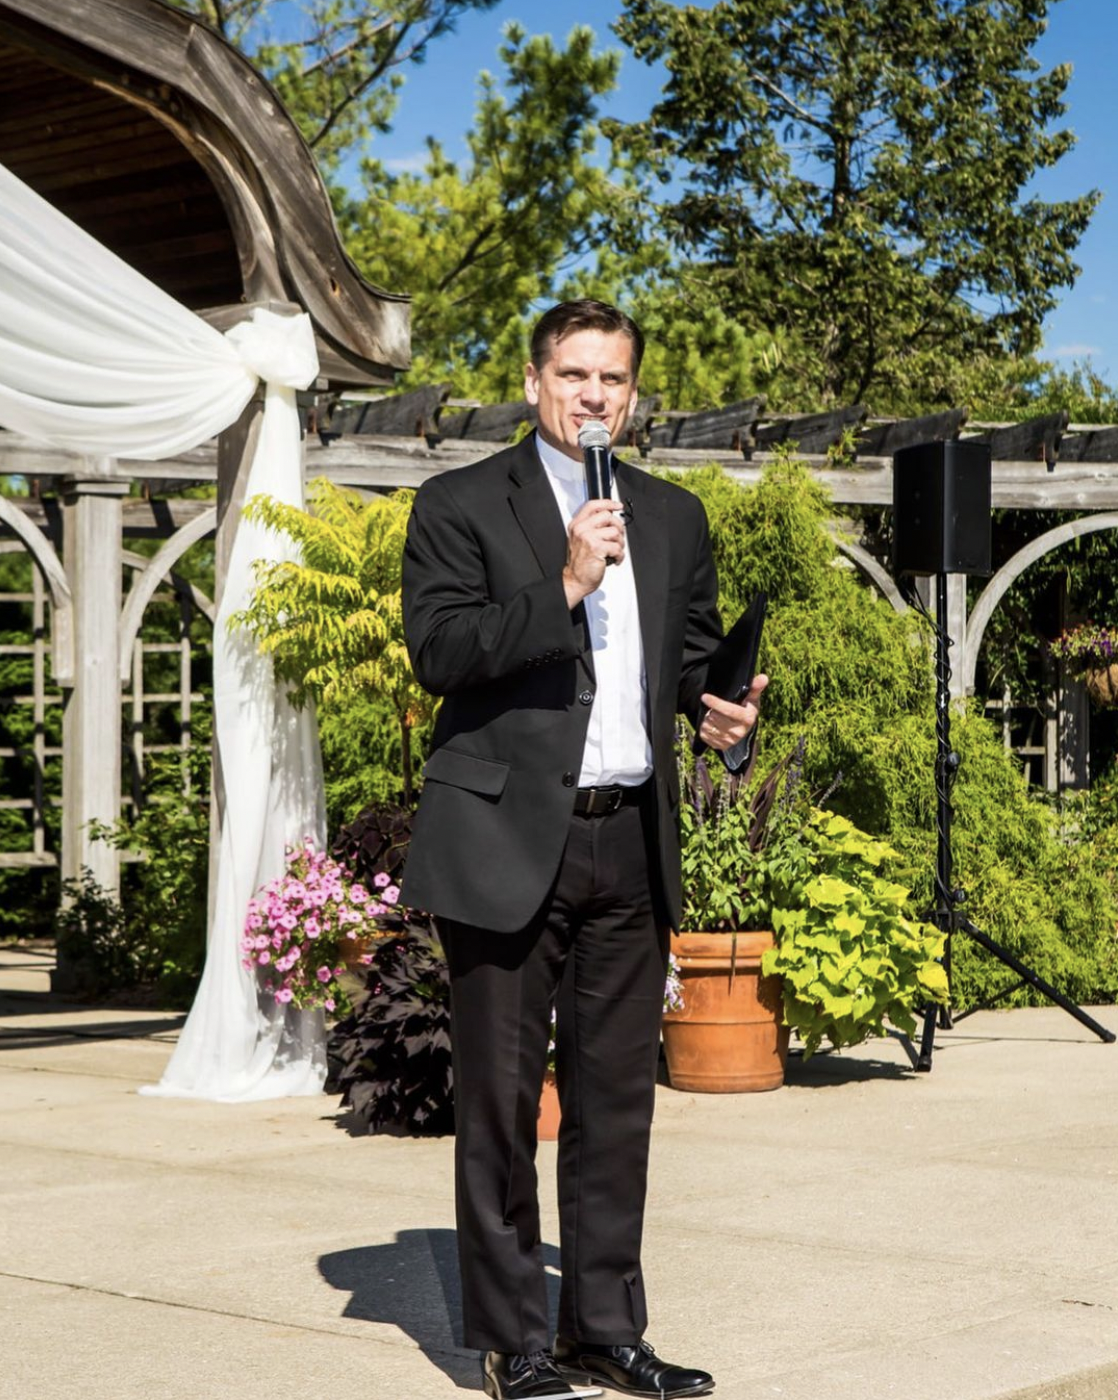 Wedding officiant stands at the front of wedding ceremony